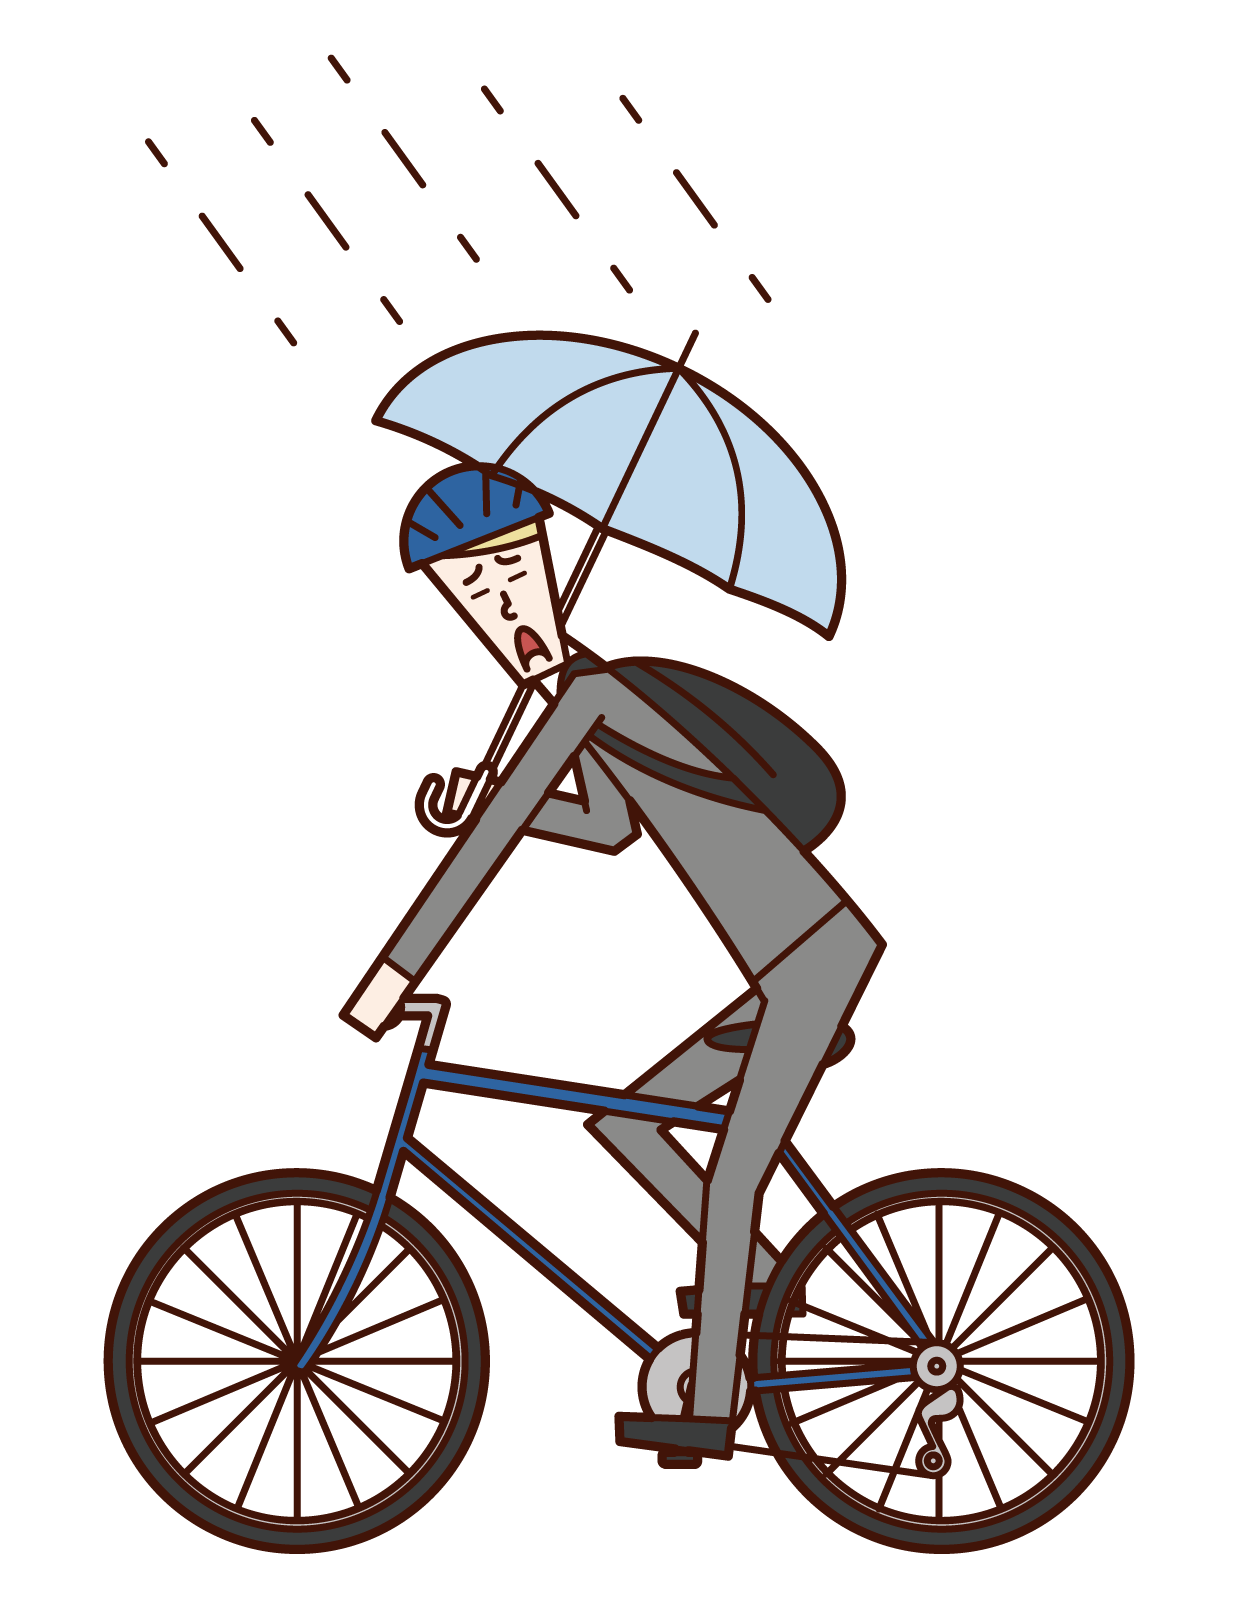 Illustration of a man driving a bicycle while holding an umbrella